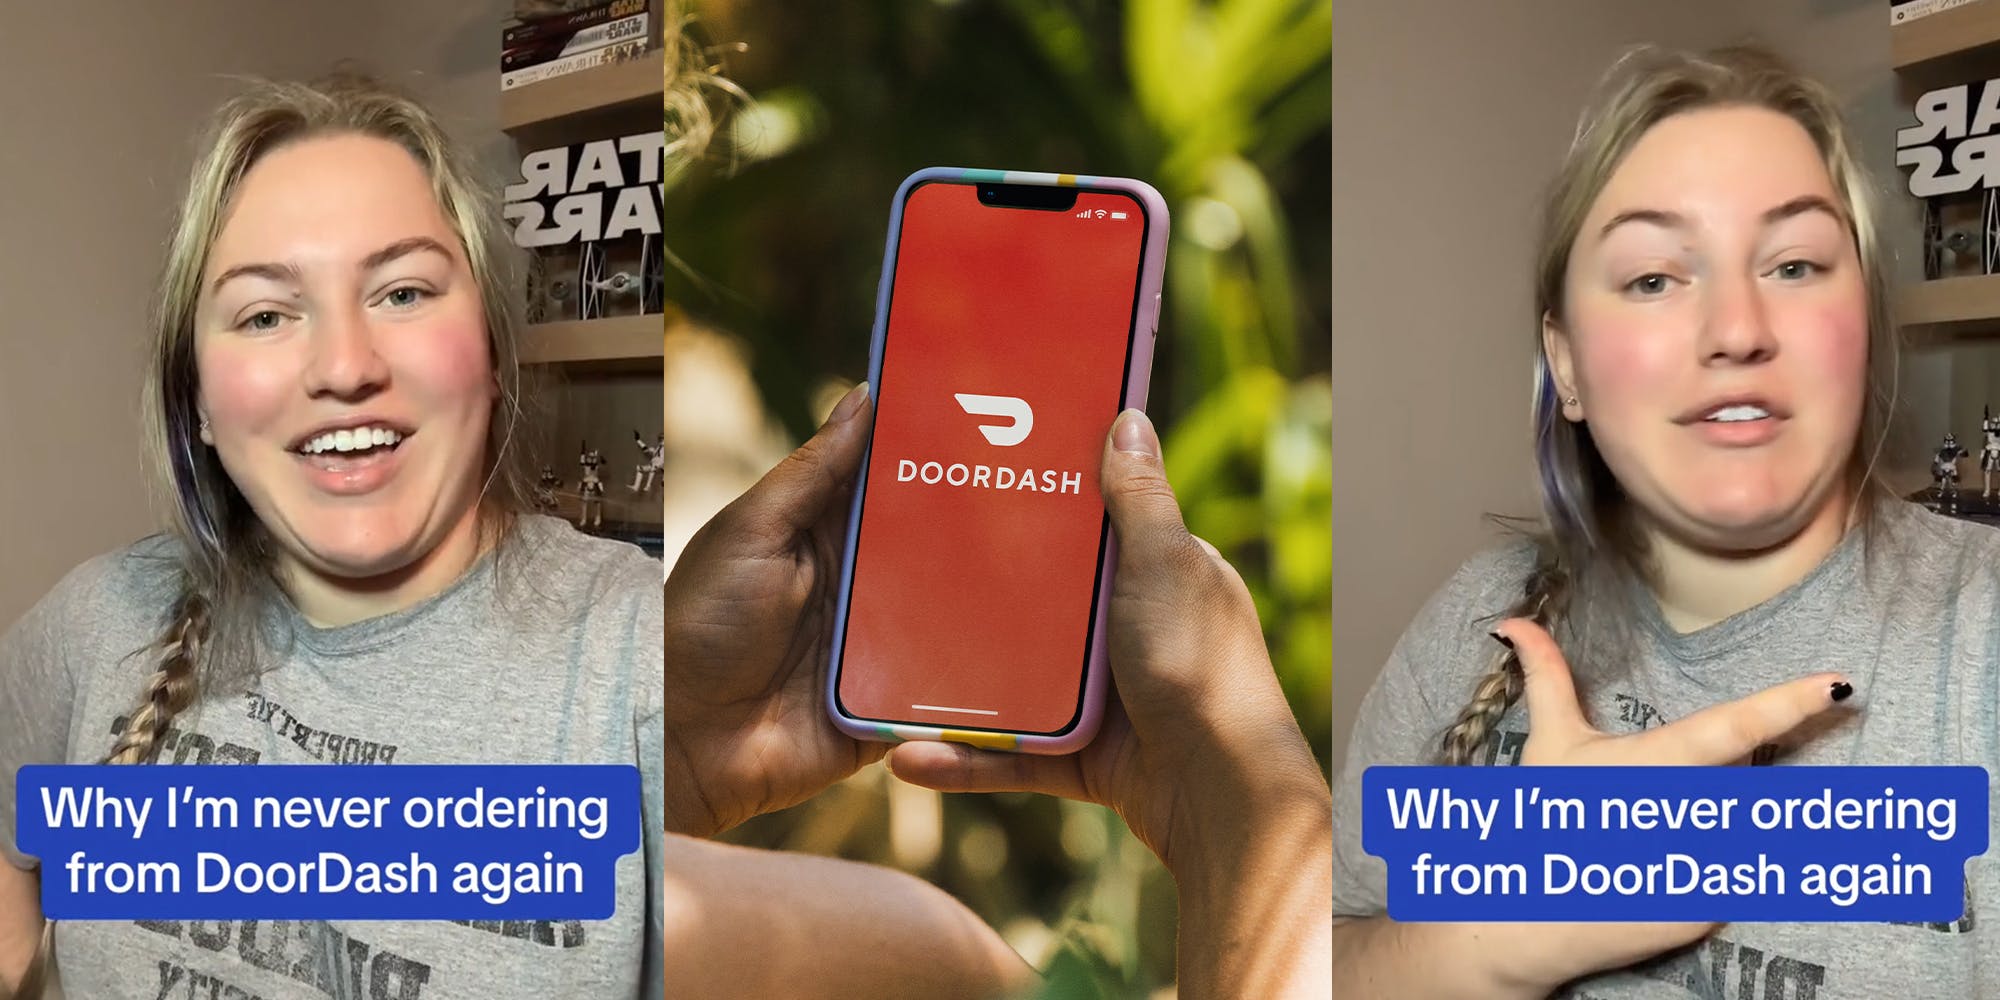 ‘Guess who’s never ordering from DoorDash again’: Customer says DoorDash kept denying her refund after driver didn’t deliver her $30 order